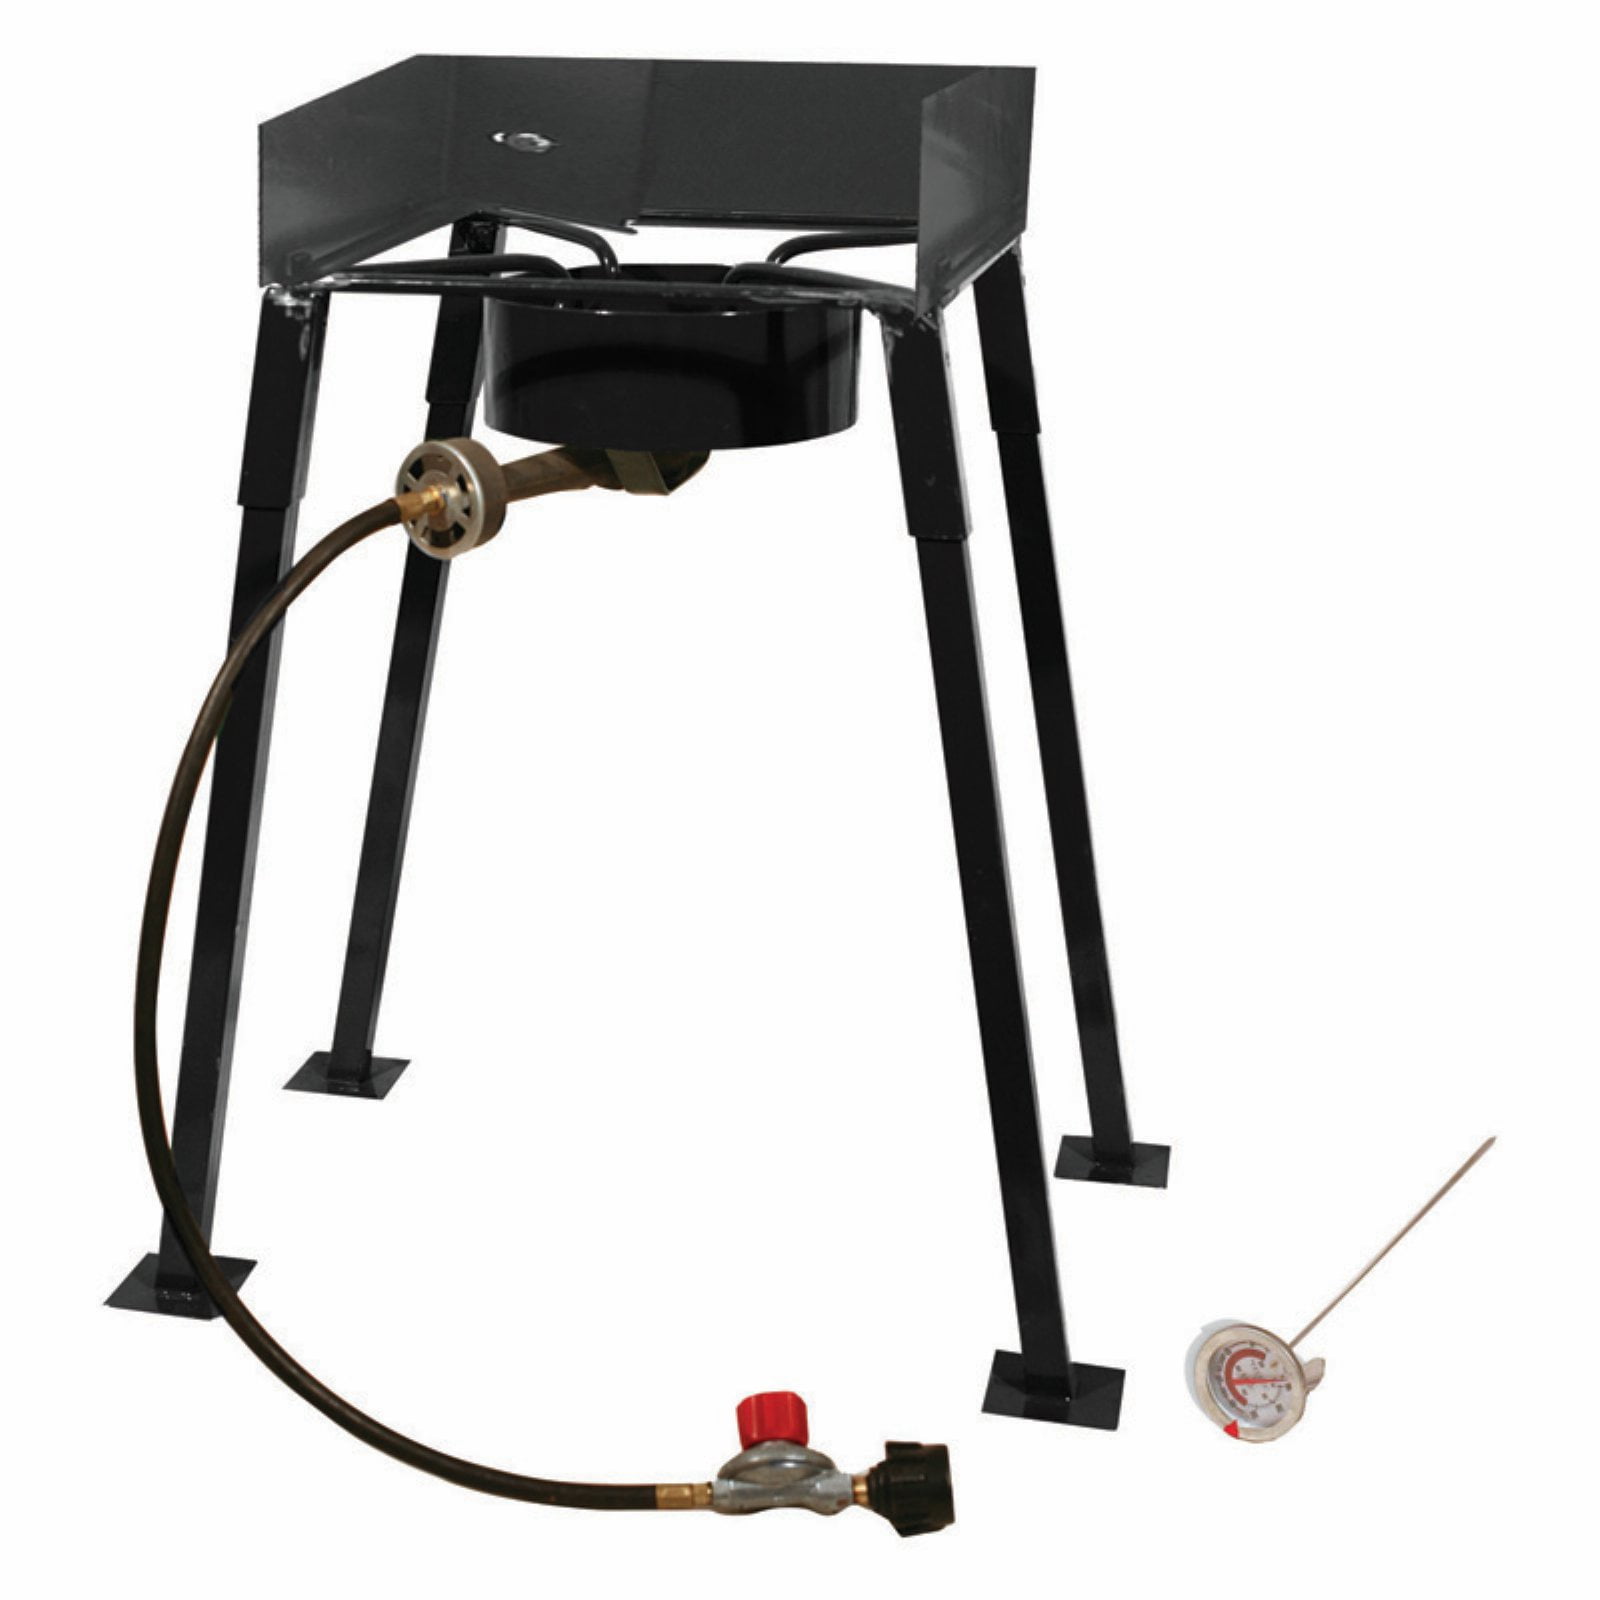 Outdoor Propane Camping Stoves Portable Single Cast Iron Burner LPG BBQ Cooker